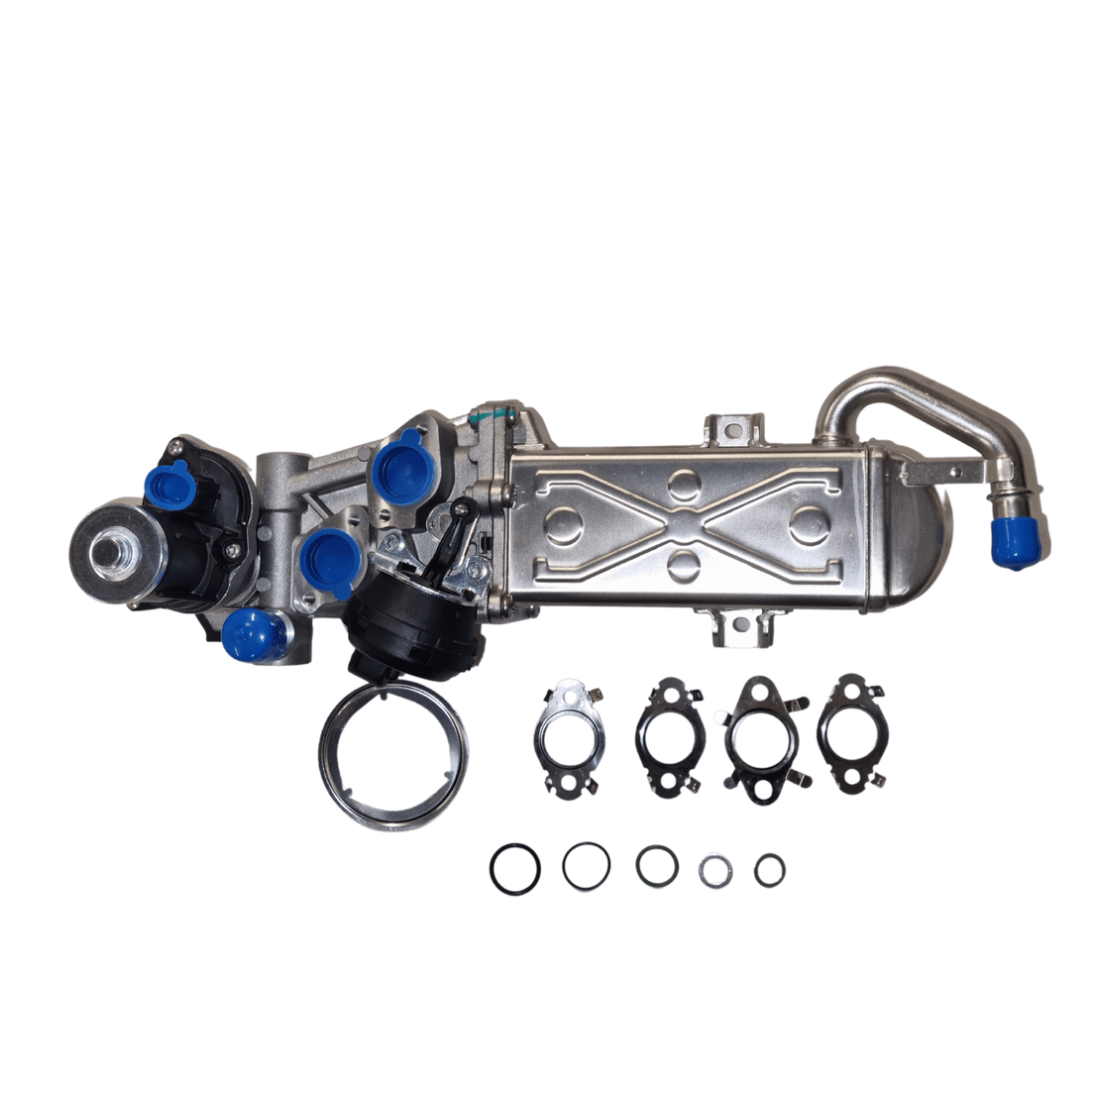 EGR delete kit suitable for the following engines 1.2 TDI, 1.9 TDI